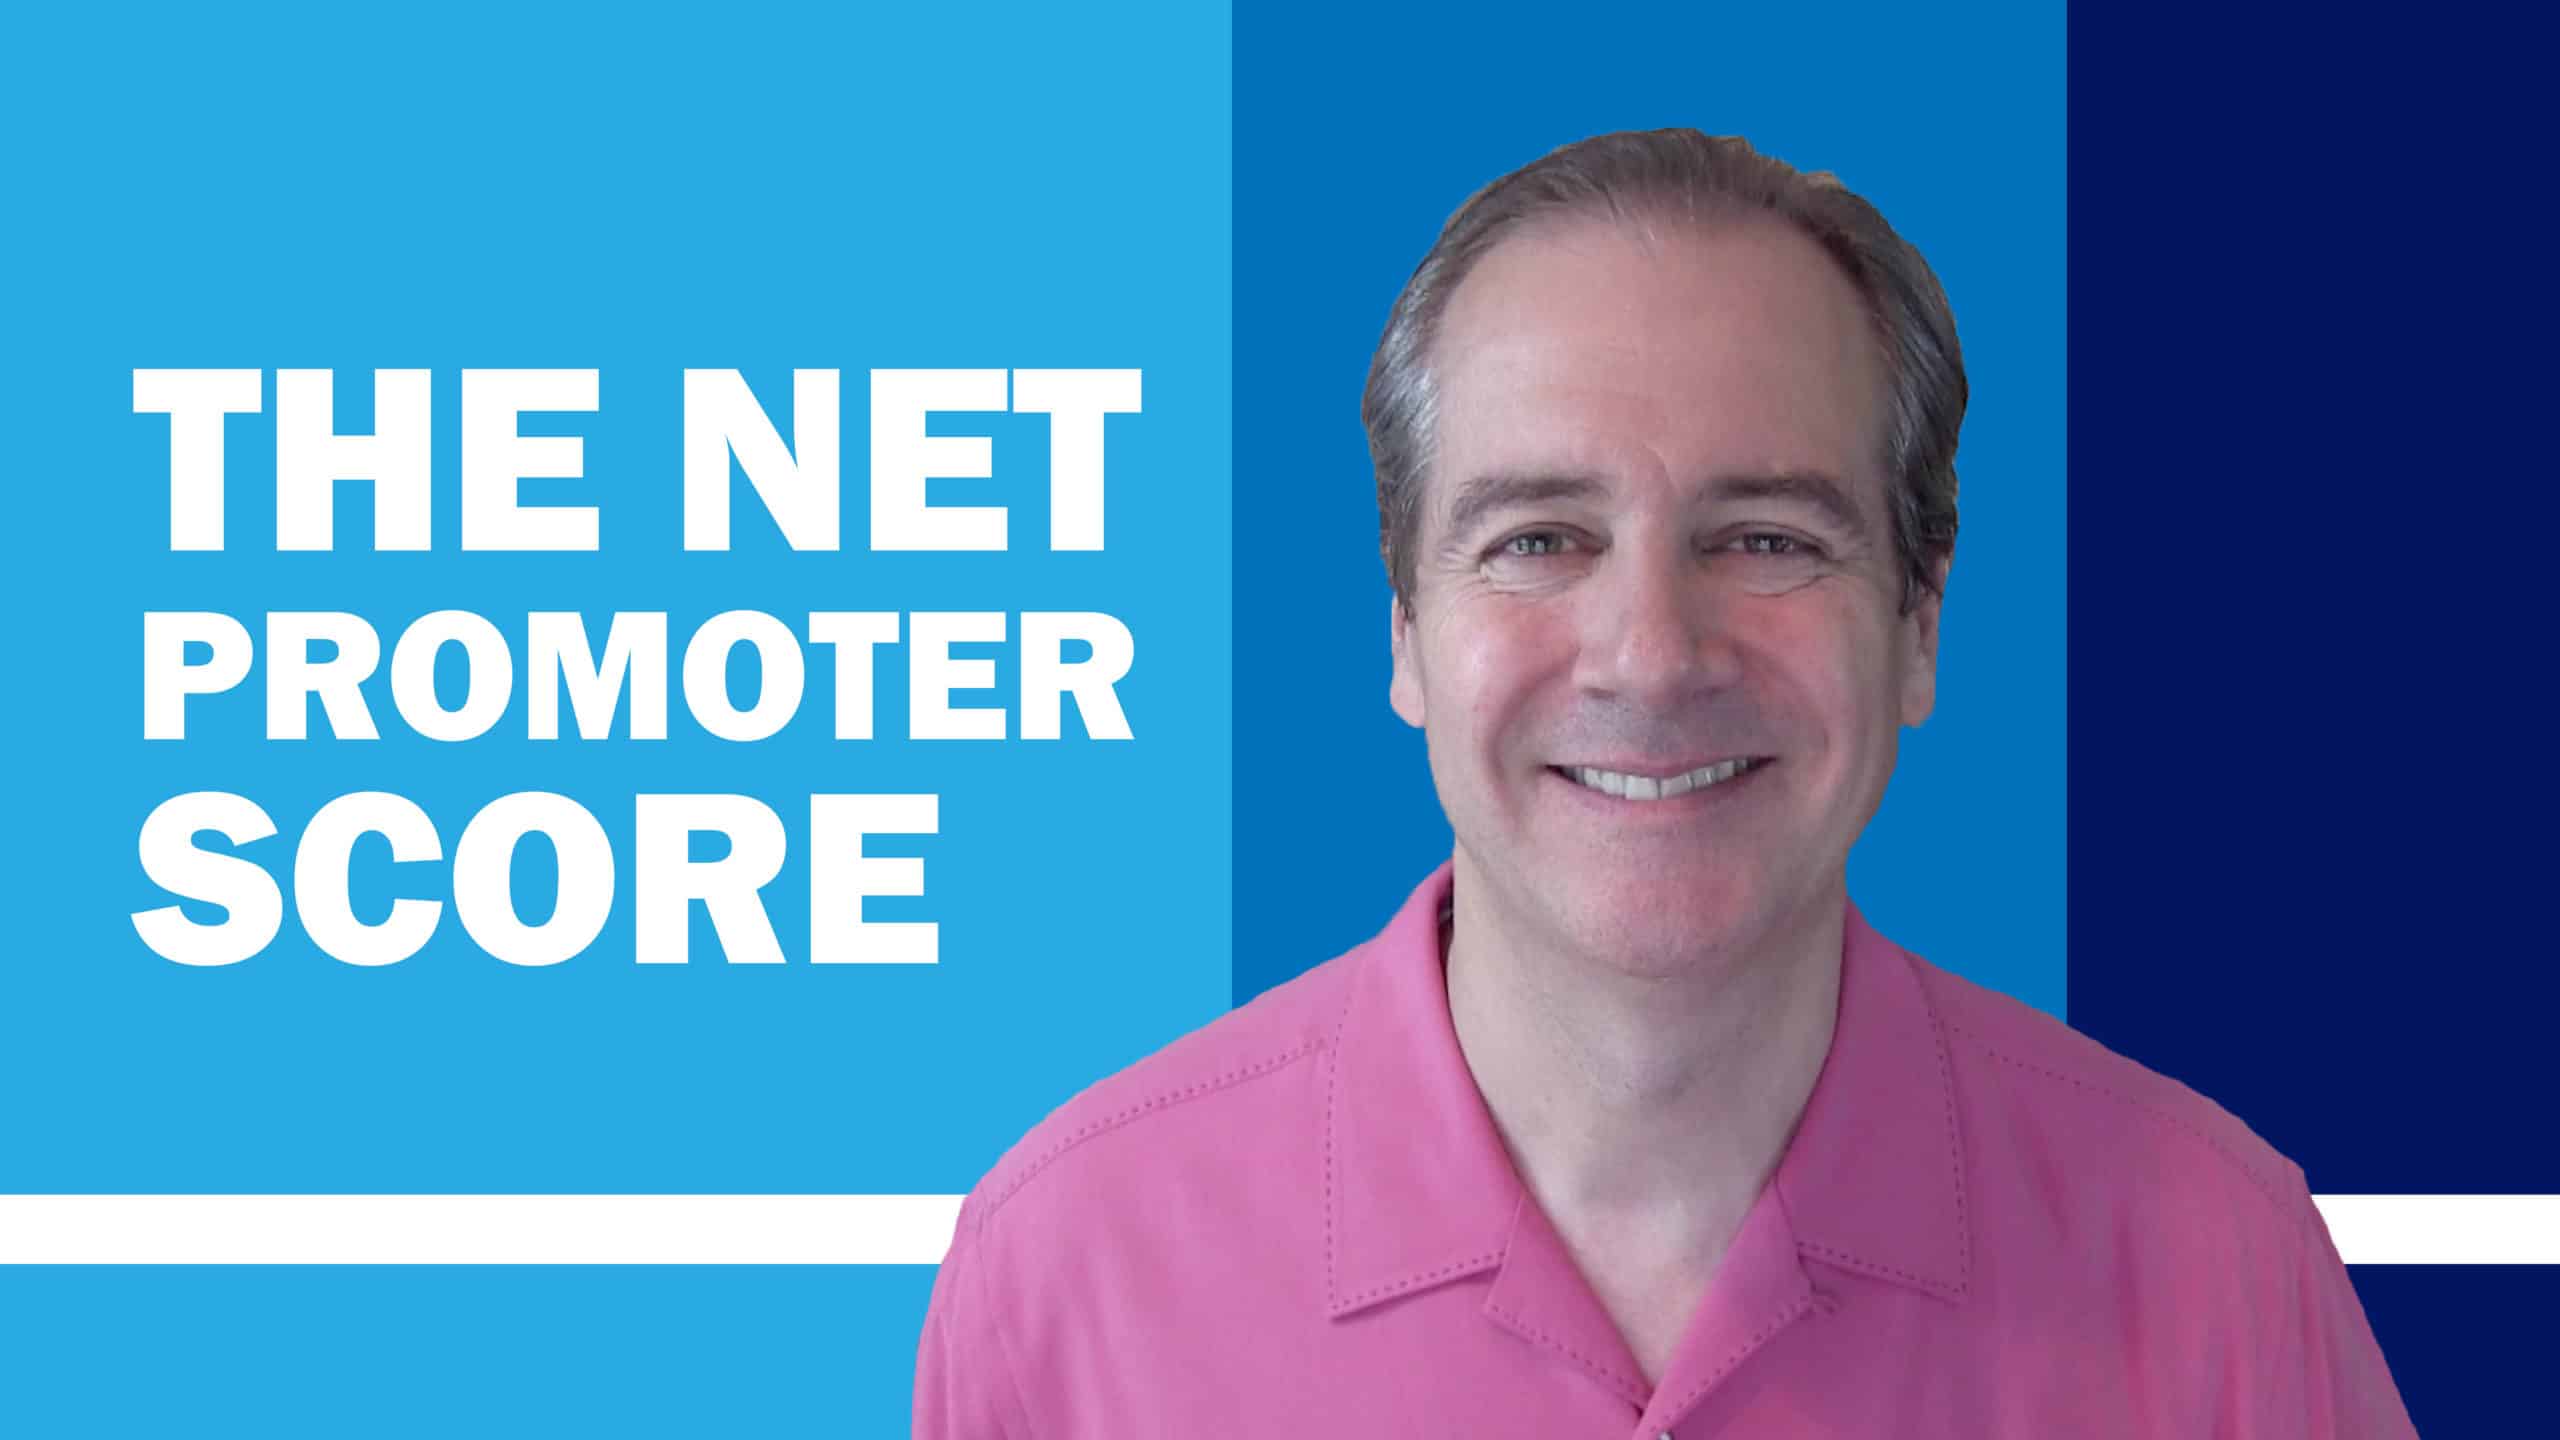 Why is The Net Promoter Score so Effective?